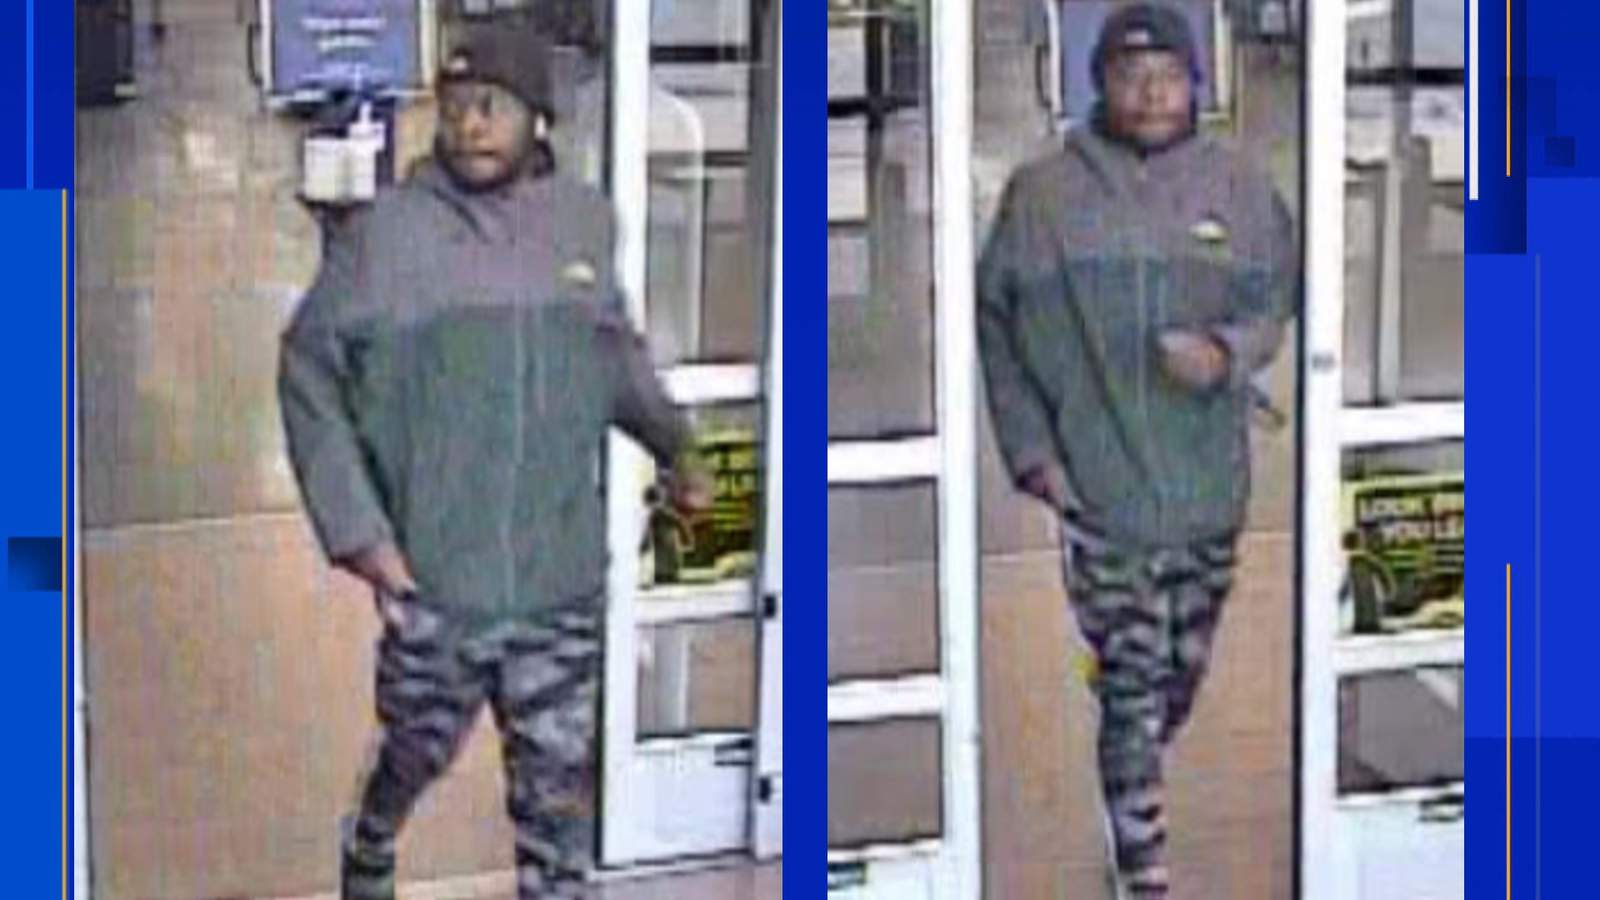 17-year-old girl sexually assaulted inside Walmart store in Saline, police say